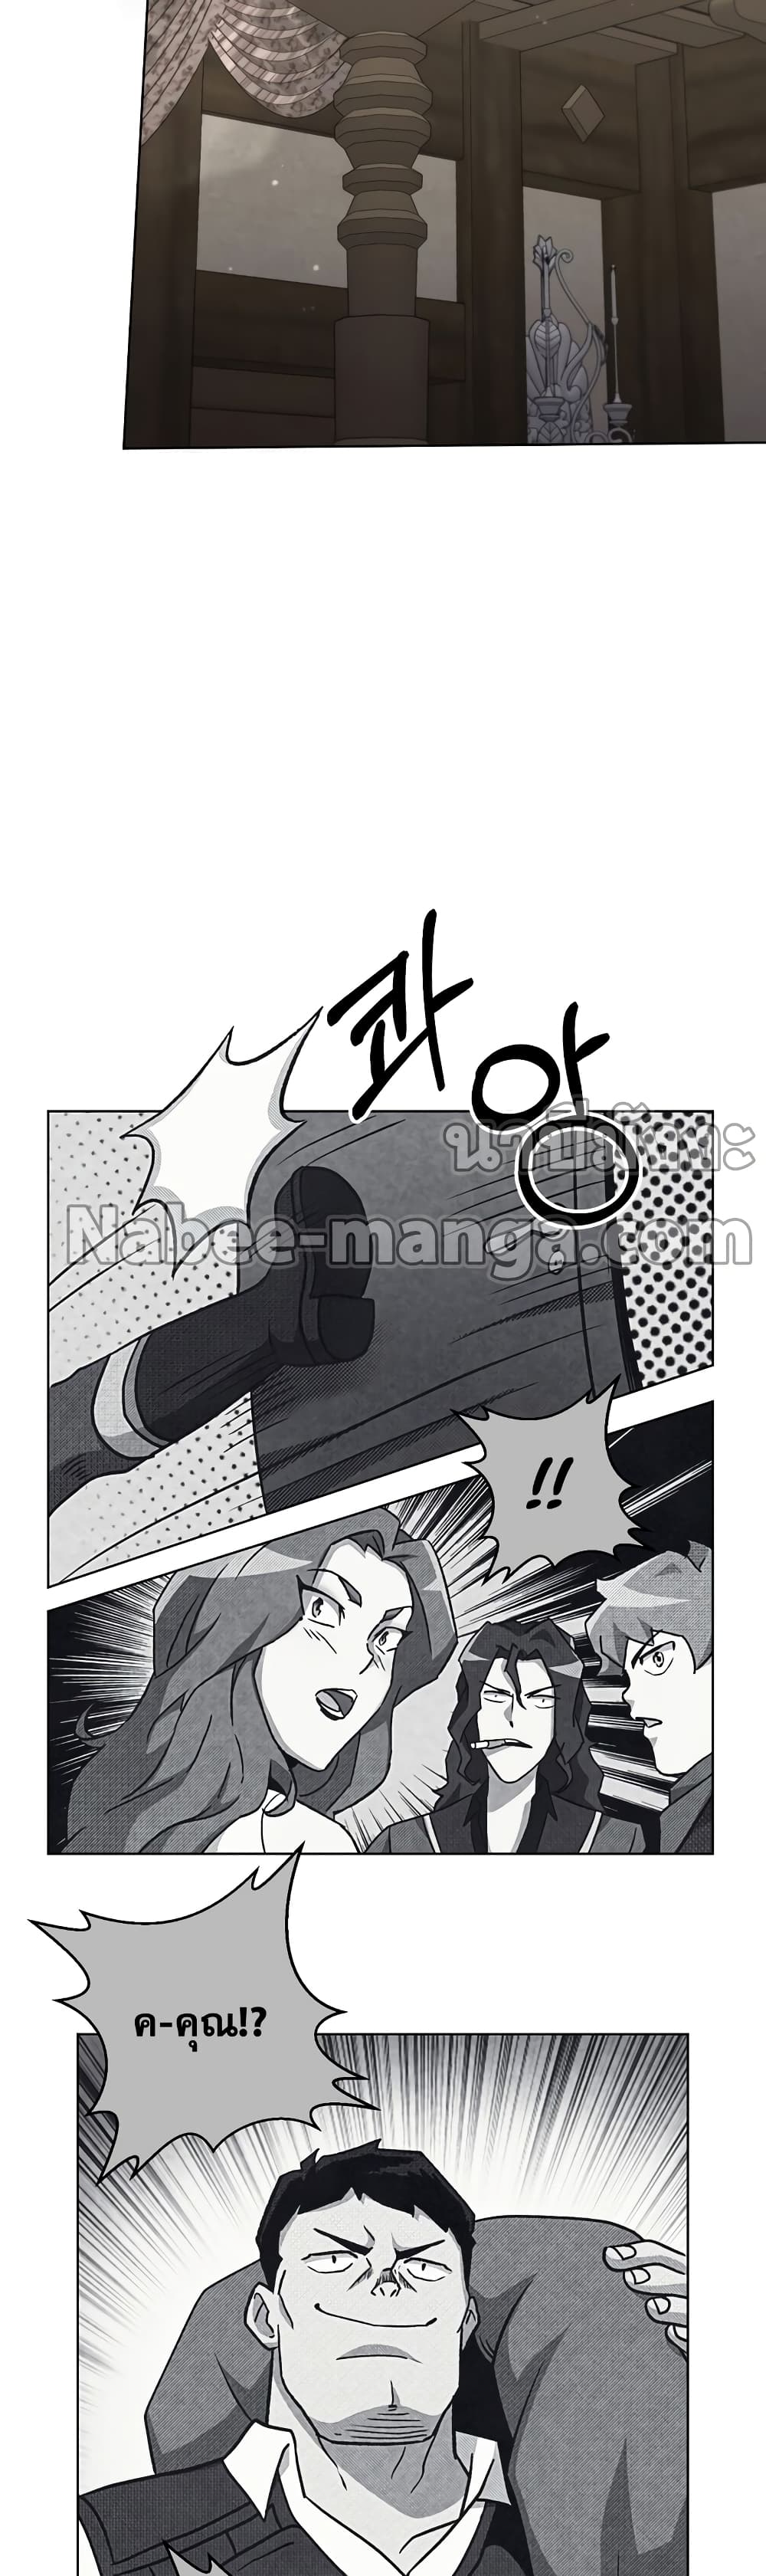 Surviving in an Action Manhwa 24-24